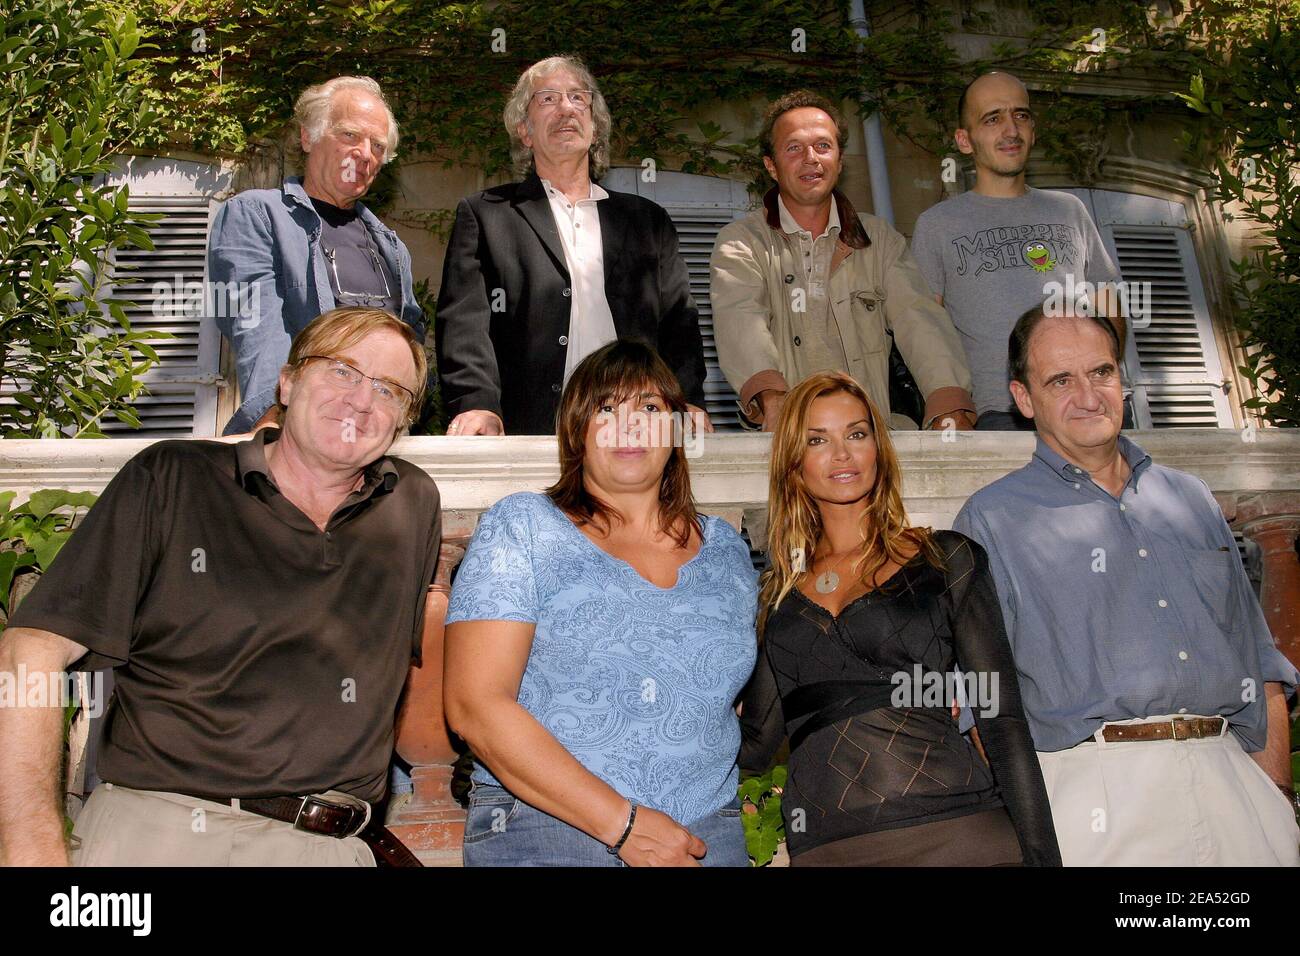 Jury members, (Back l to r) Peter Kassovitz, Gerard Carre, Laurent Malet, and Eric Neveux, (Front l to r) Quentin Raspail, Michele Bernier, Ingrid Chauvin and Pierre Lescure pose during the 7th TV fiction Festival in Saint-Tropez, France, on September 15, 2005. Photo by Gerald Holubowicz/ABACAPRESS.COM Stock Photo